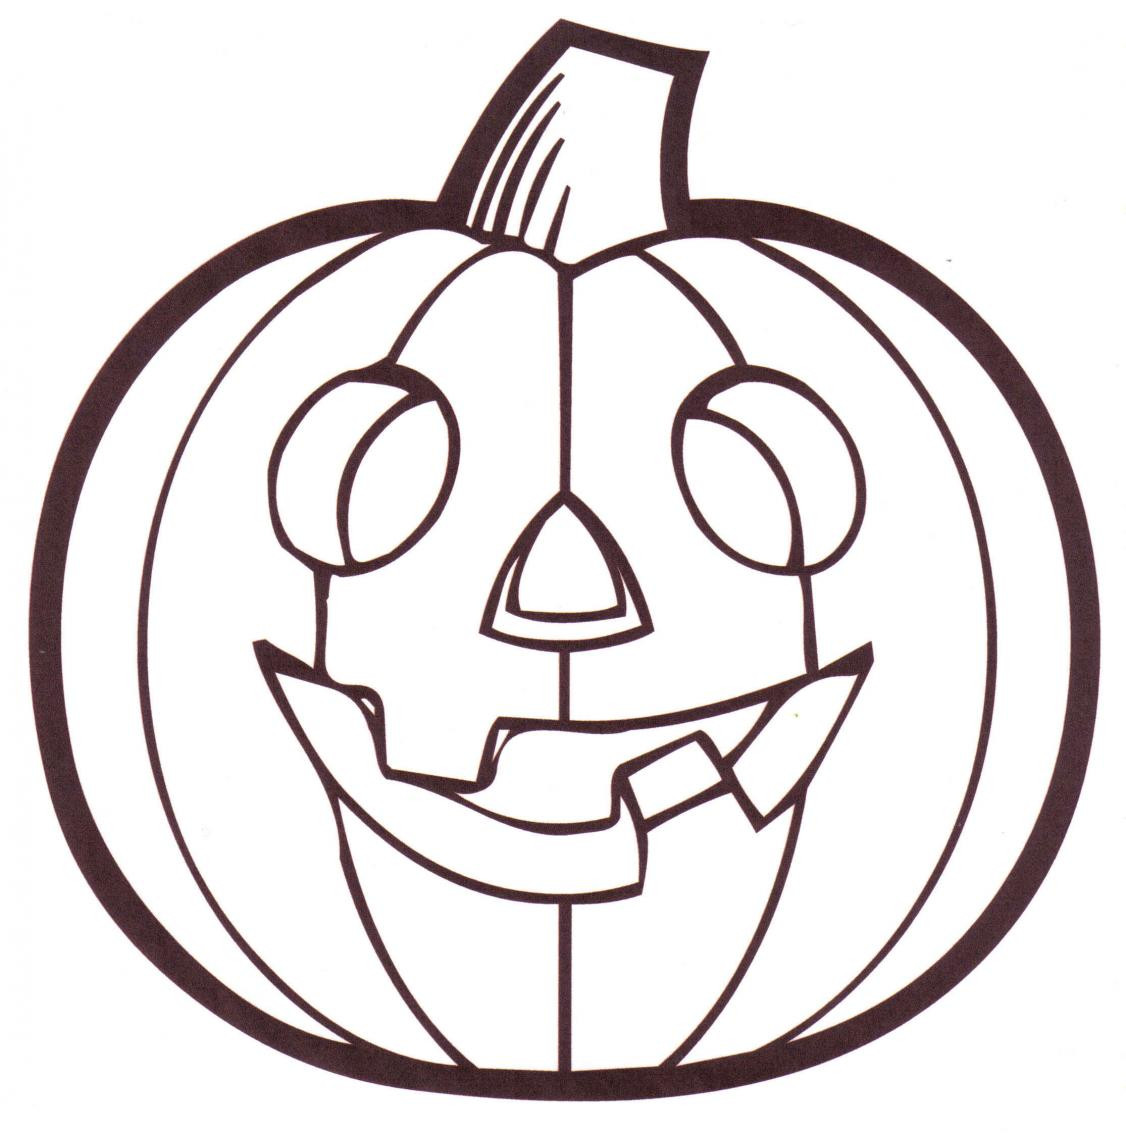 Coloring Pages Of Pumpkins
 Free Printable Pumpkin Coloring Pages For Kids